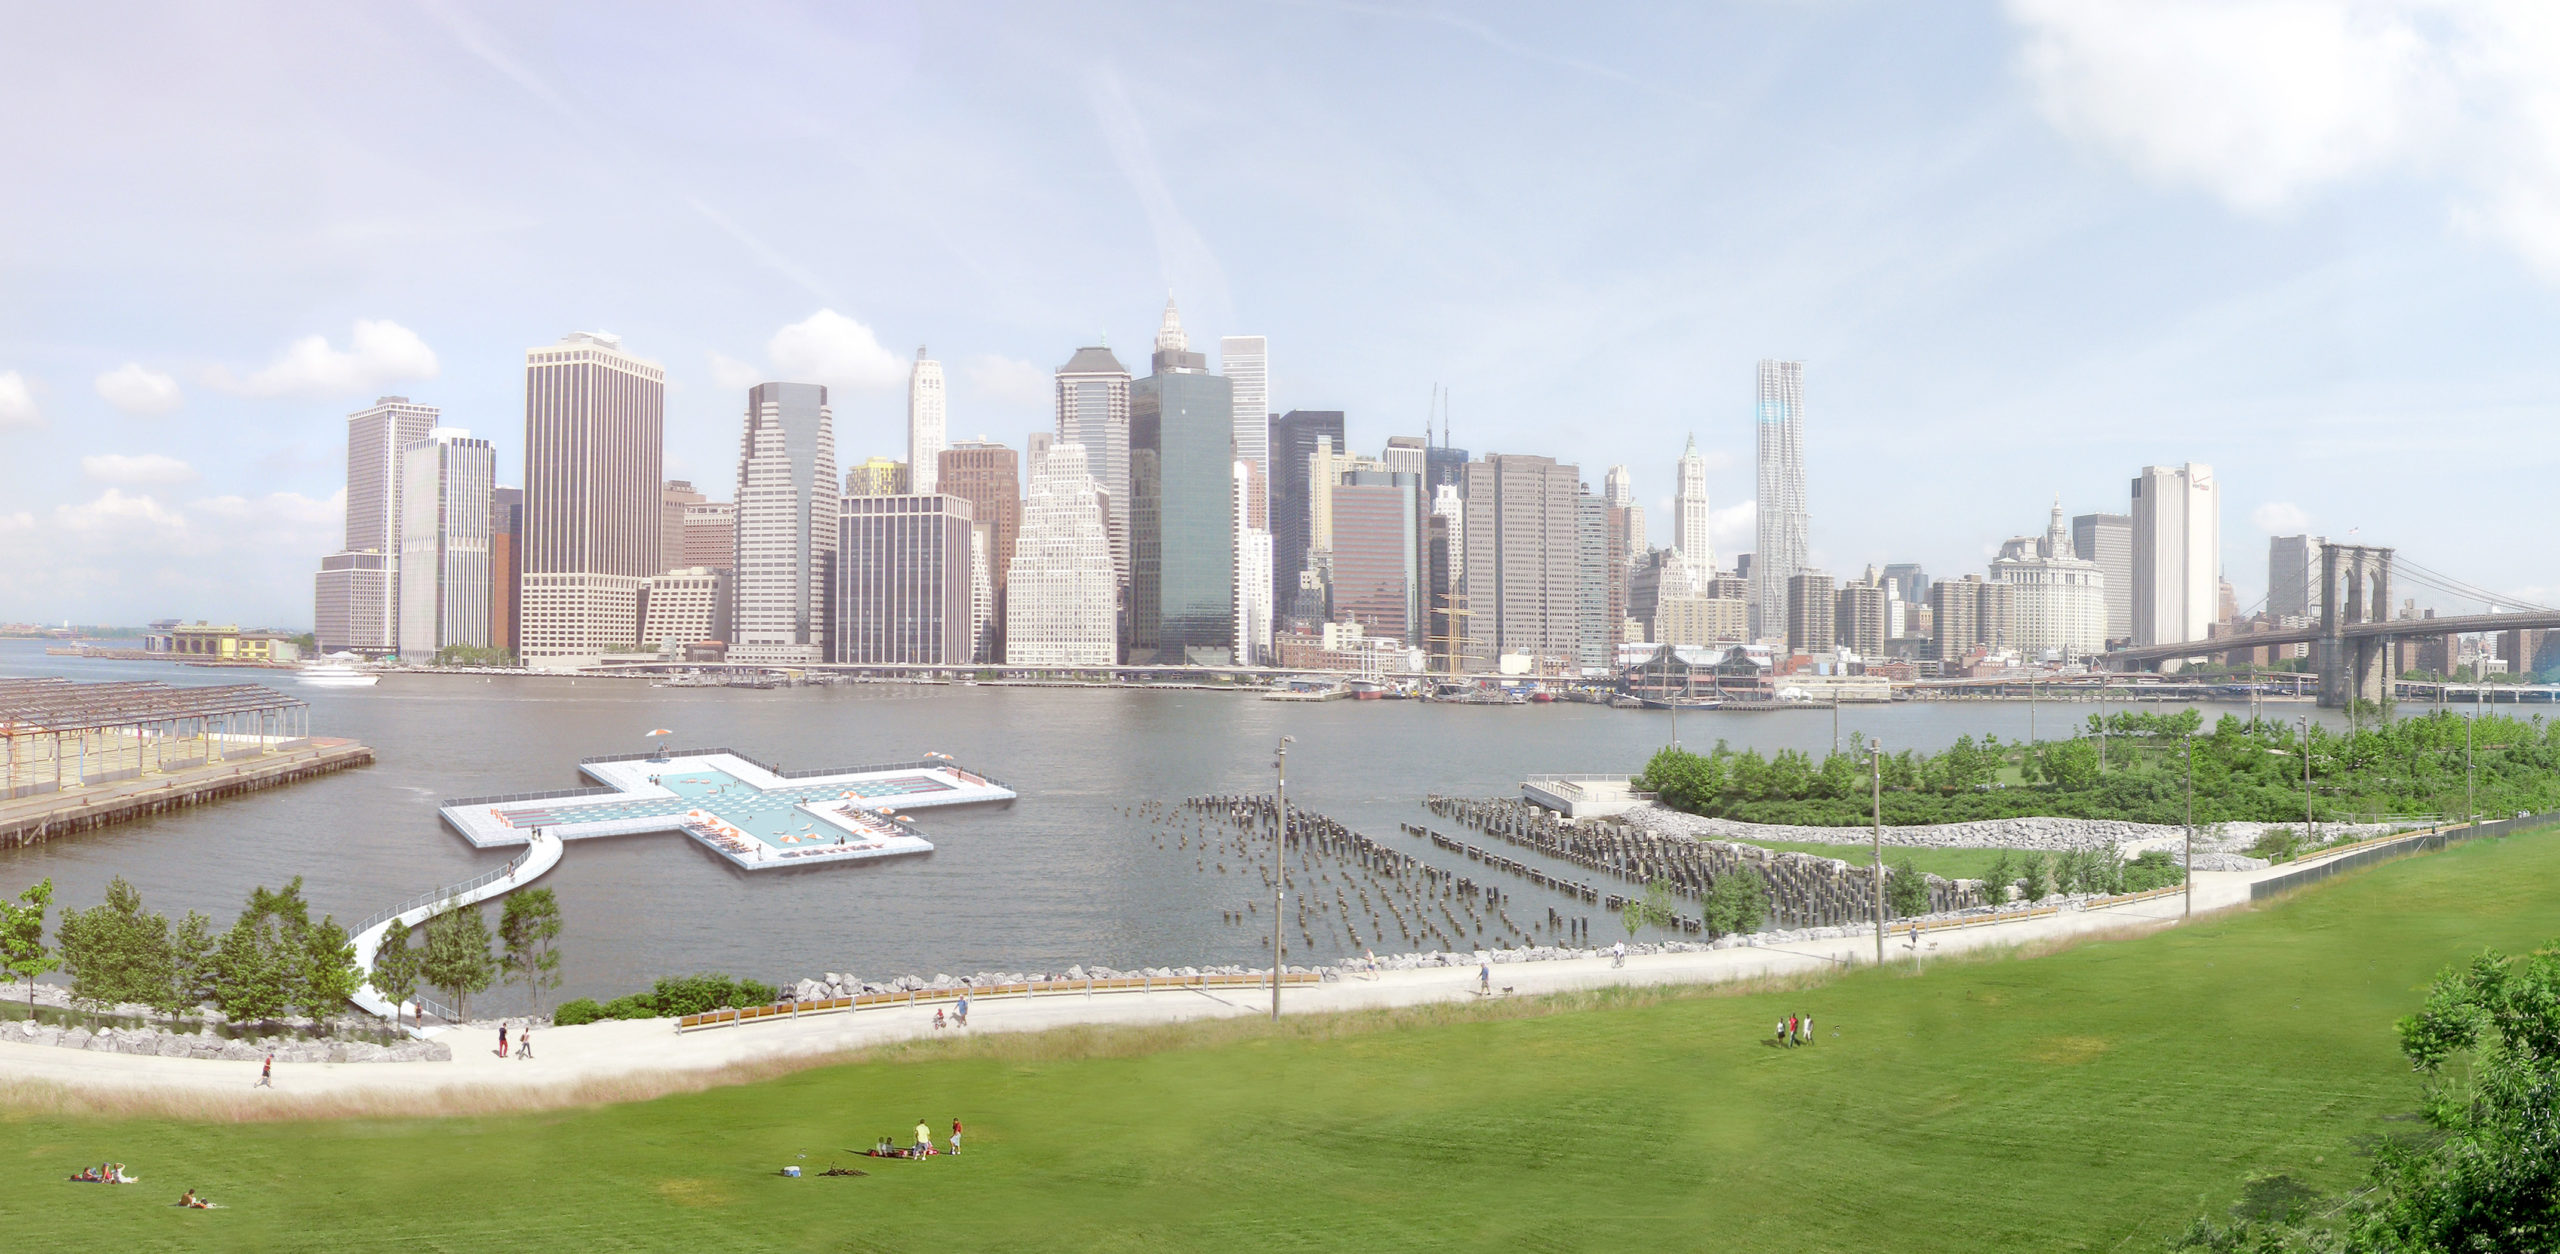 Kickstarter Urbanism: Why Building A Park Takes More Than Crowdfunding